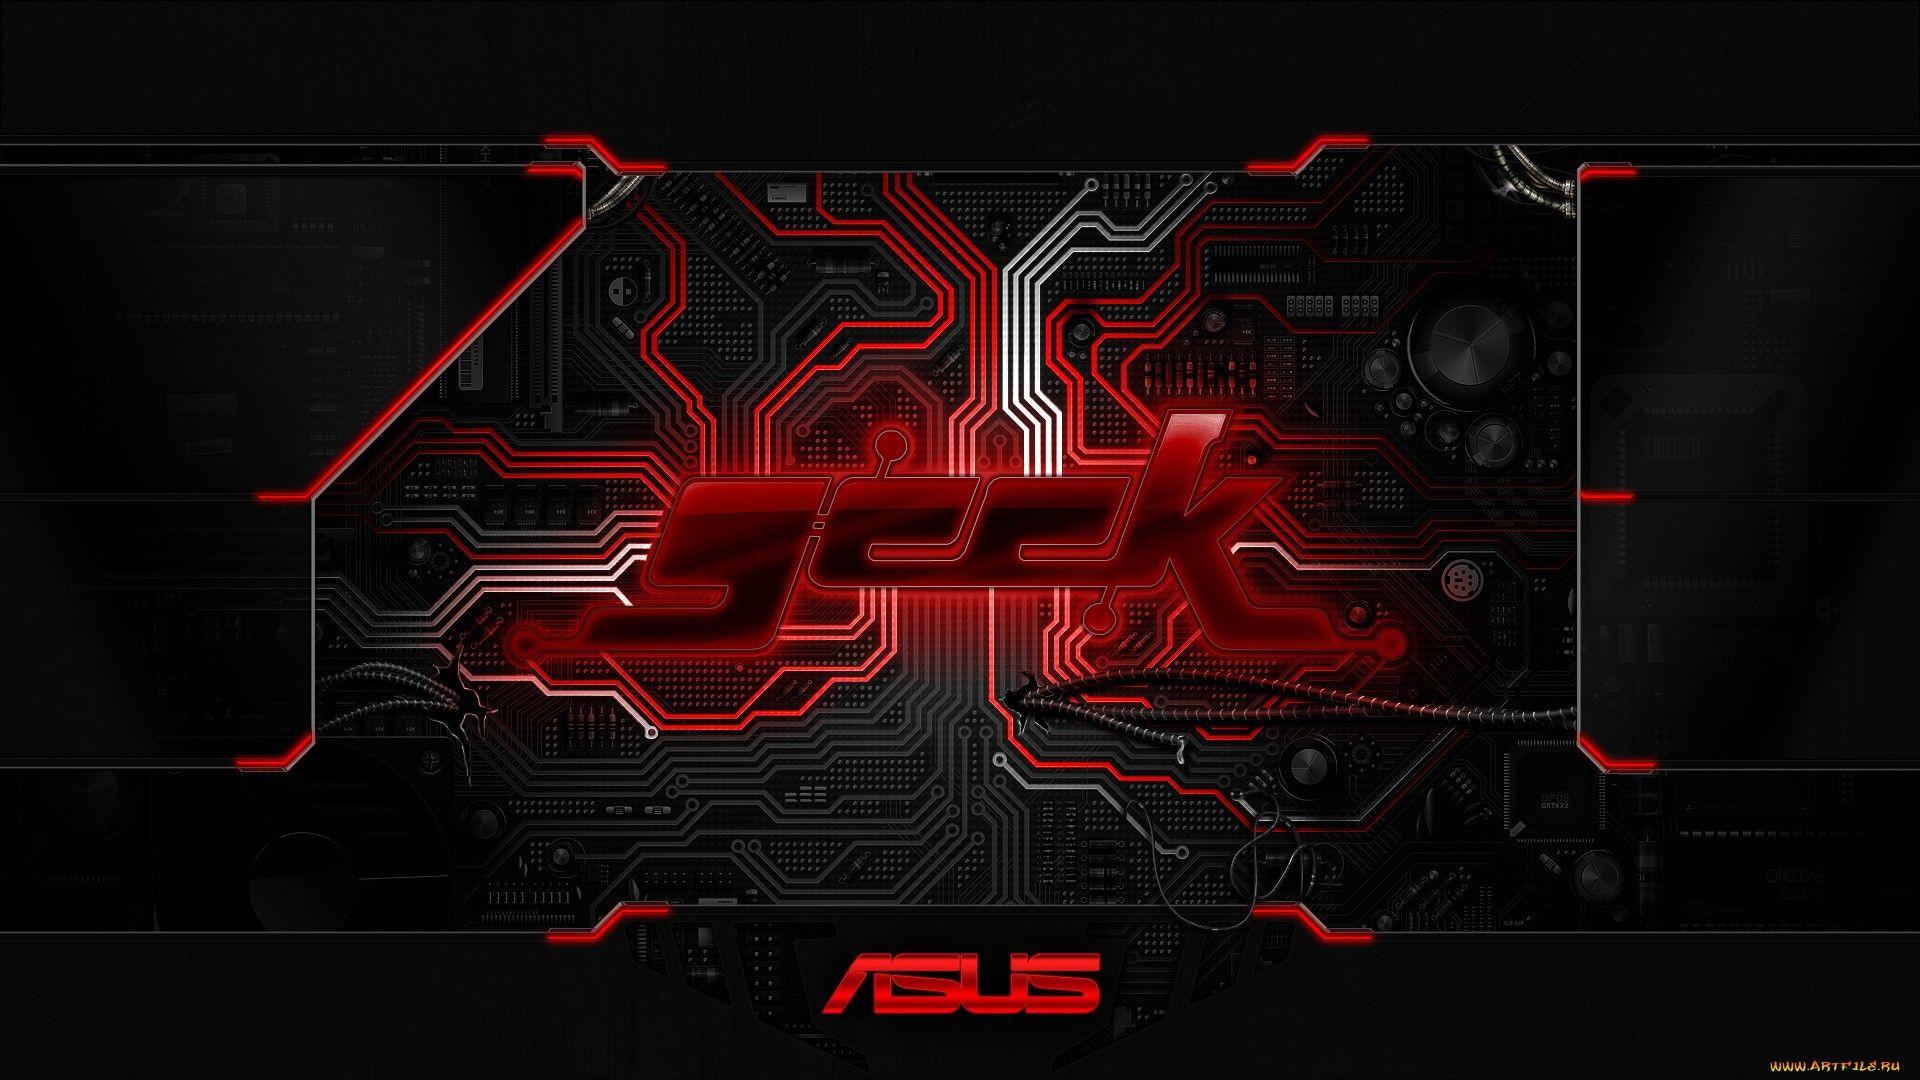 Asus Tuf Laptop Wallpaper 4k Asus Tuf Wallpapers Posted By Christopher